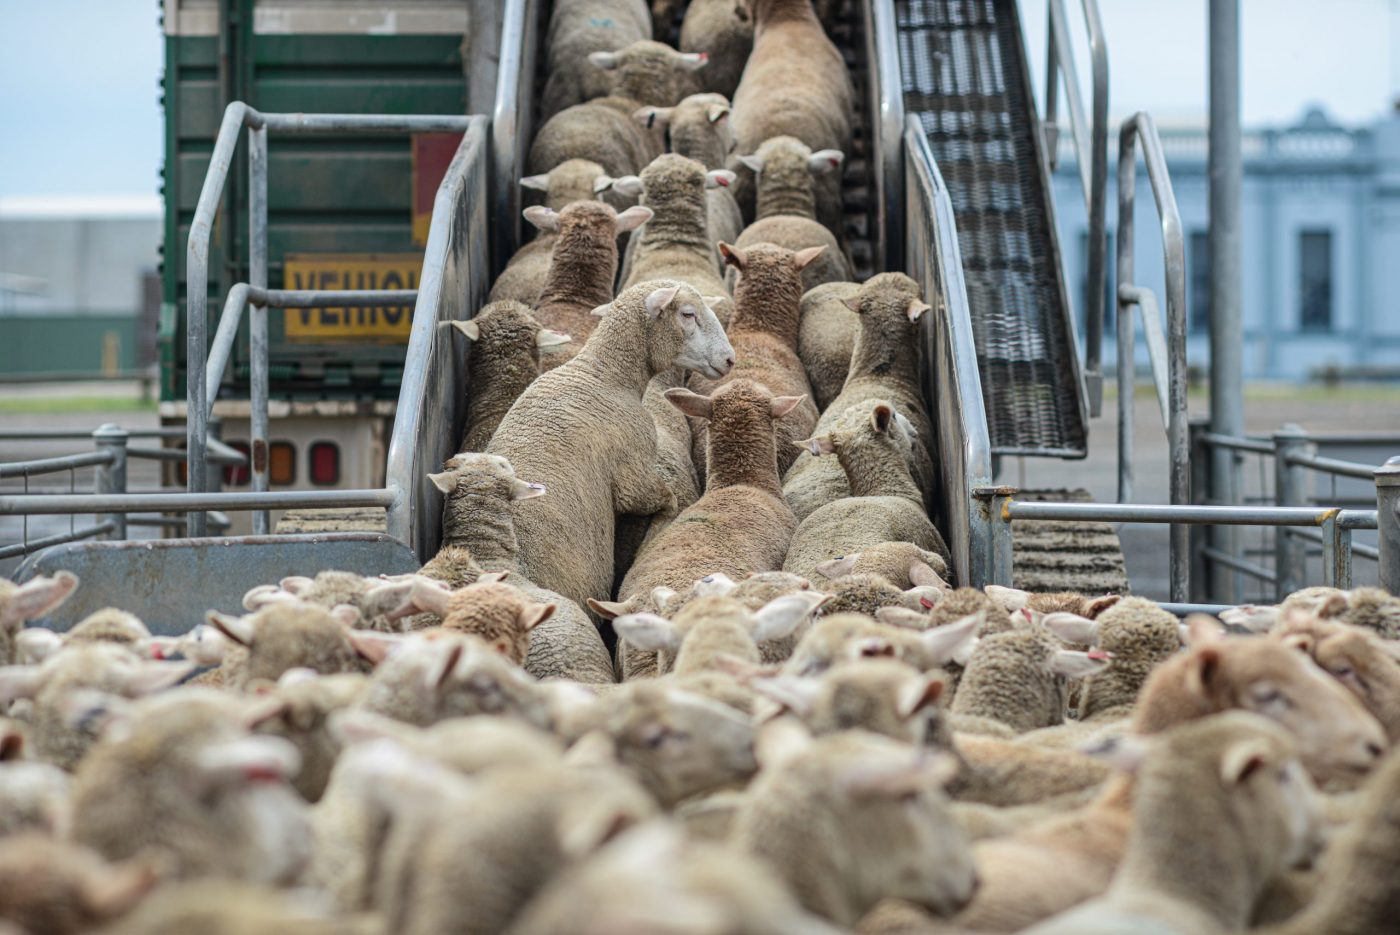 Vertical explainer photo 2 - Sheep being loaded onto trucks from the sale yards. Australia, 2013.